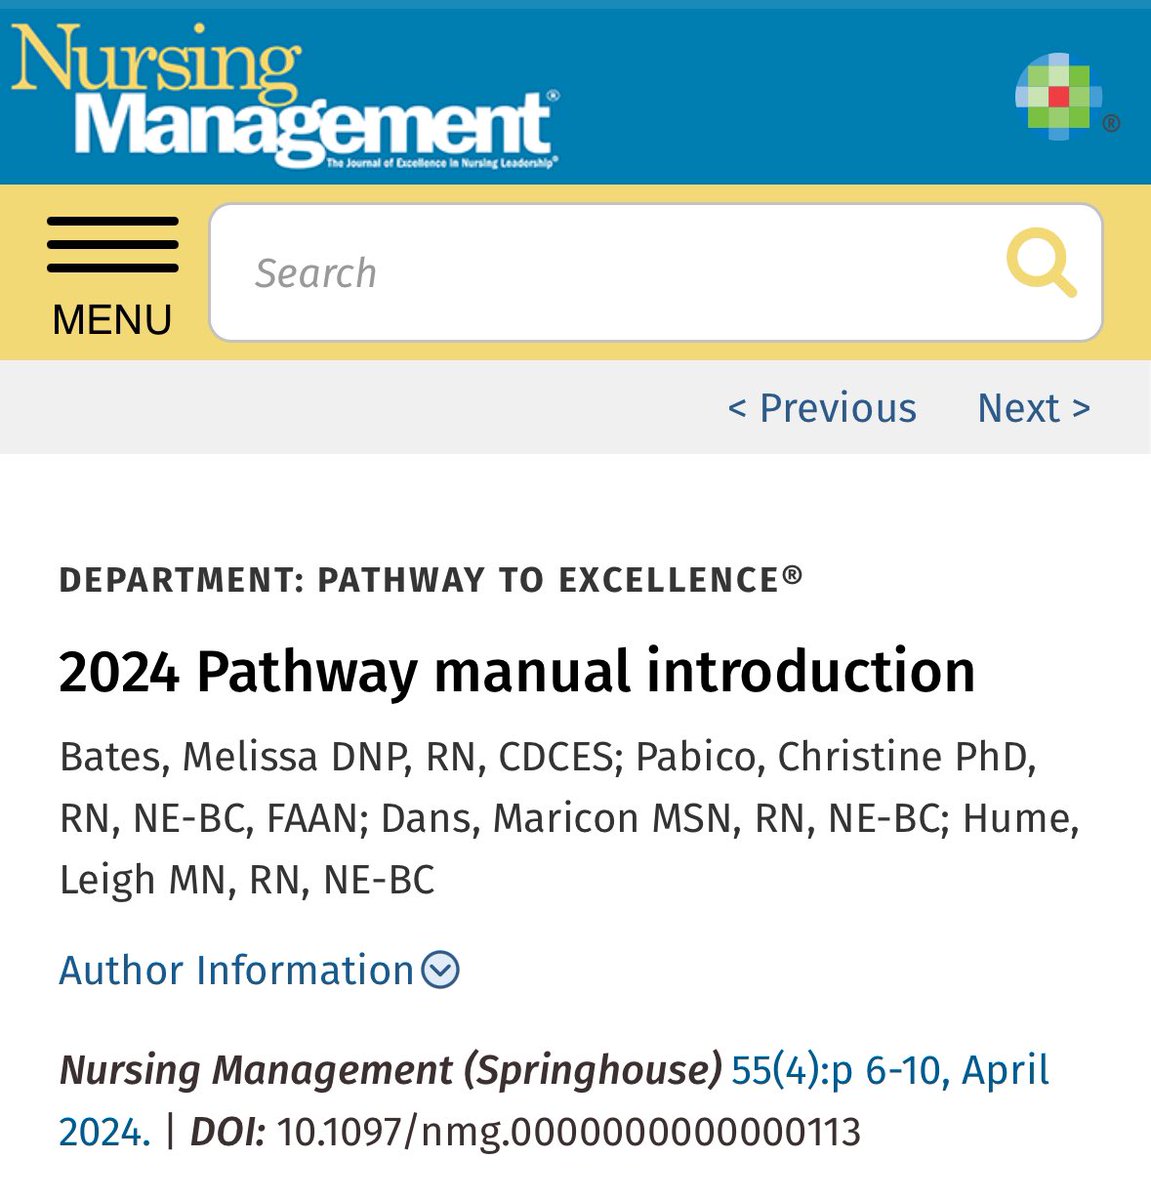 #ANCCPathway article outlining new requirements in the 2024 Application Manual👇🏼. Discover the changes made to blueprint for creating #nursevalidated #positivepracticeenvironments 💙. Click on the link below to access the full article. lnkd.in/ejDbzVxG